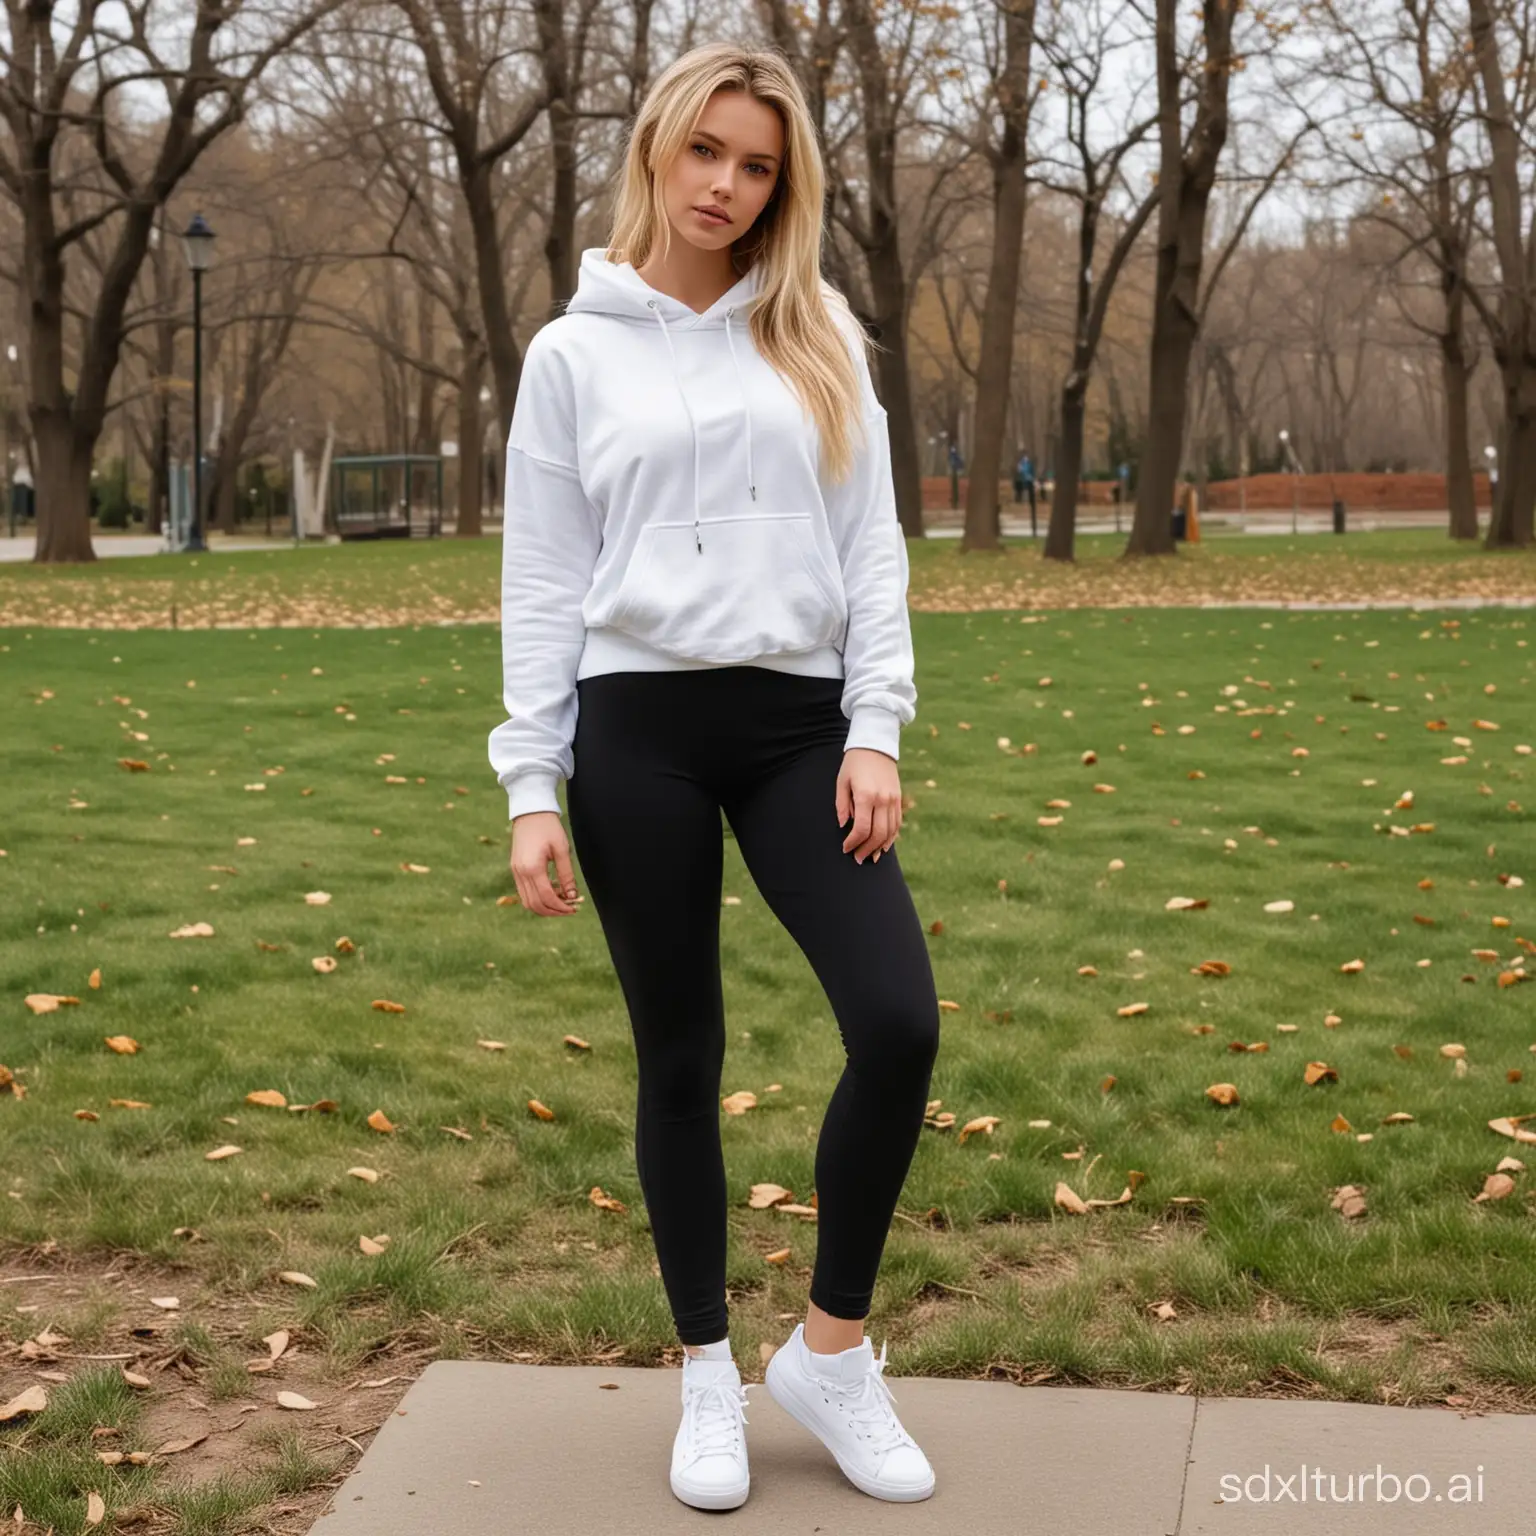 Girl stands in an epic pose with her legs shoulder-width apart, torso slightly turned to the left, 17, athletic, regular white hoodie, blonde, deep neckline, black tight leggings, white high top sneakers, white socks, many details, style raw, long  strong thick legs, outside in a park, high angle, 32k, realistic photograph.